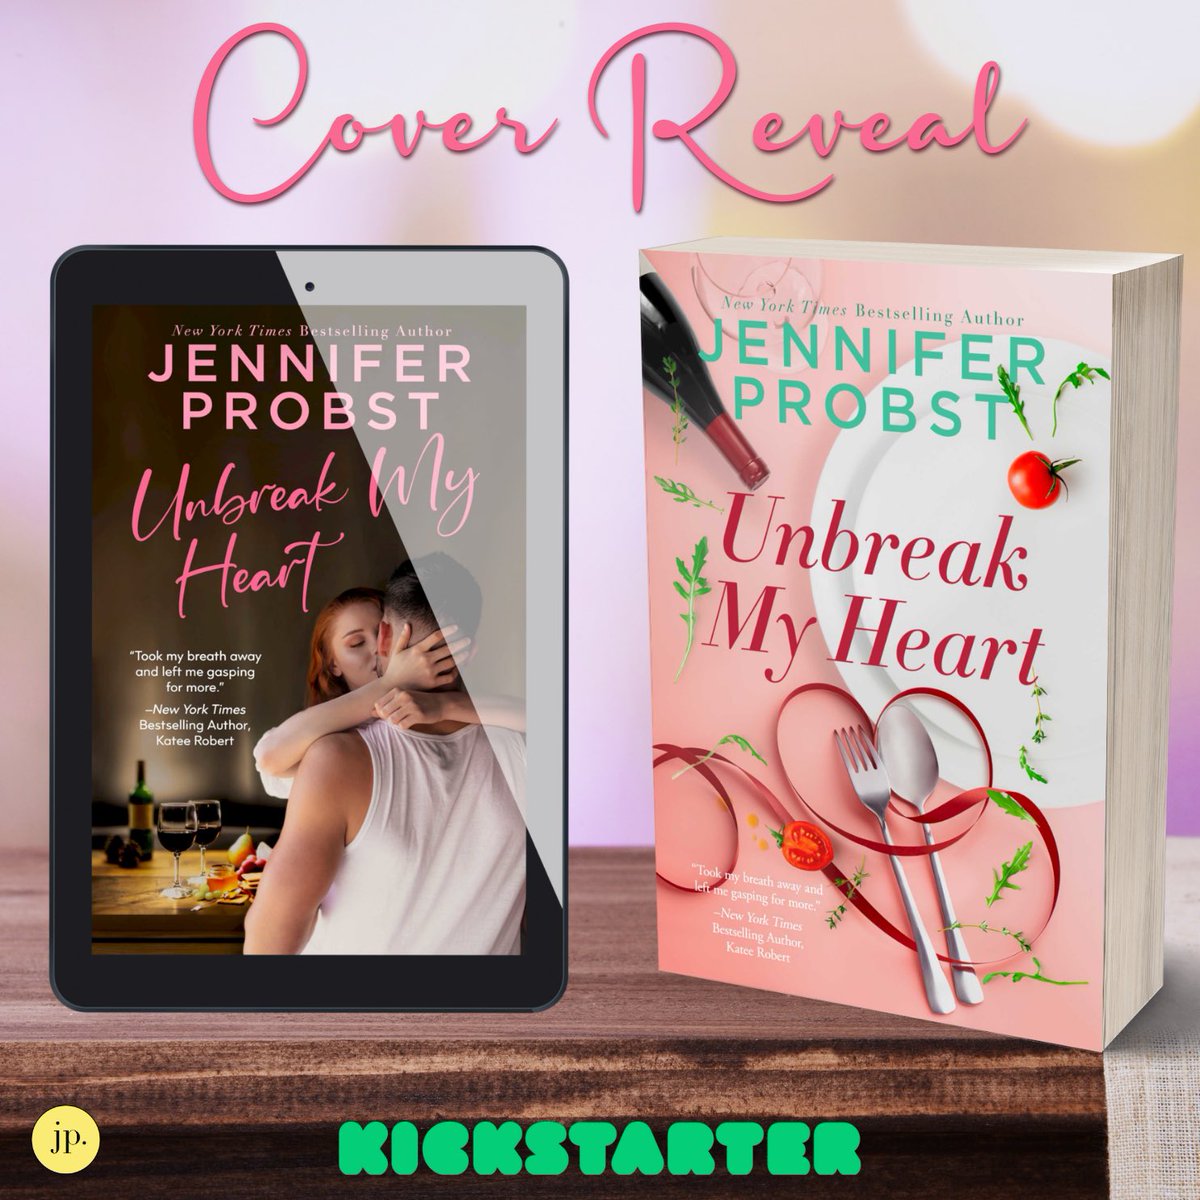 A steamy, second chance romance novel, Unbreak My Heart by @jenniferprobst is being re-issued with new covers and scenes for the 10th anniversary celebration! 
 
Check out the Kickstarter launch here!
bit.ly/3ZrcnIv
 
#UnbreakMyHeart #JenniferProbst#valentineprlm